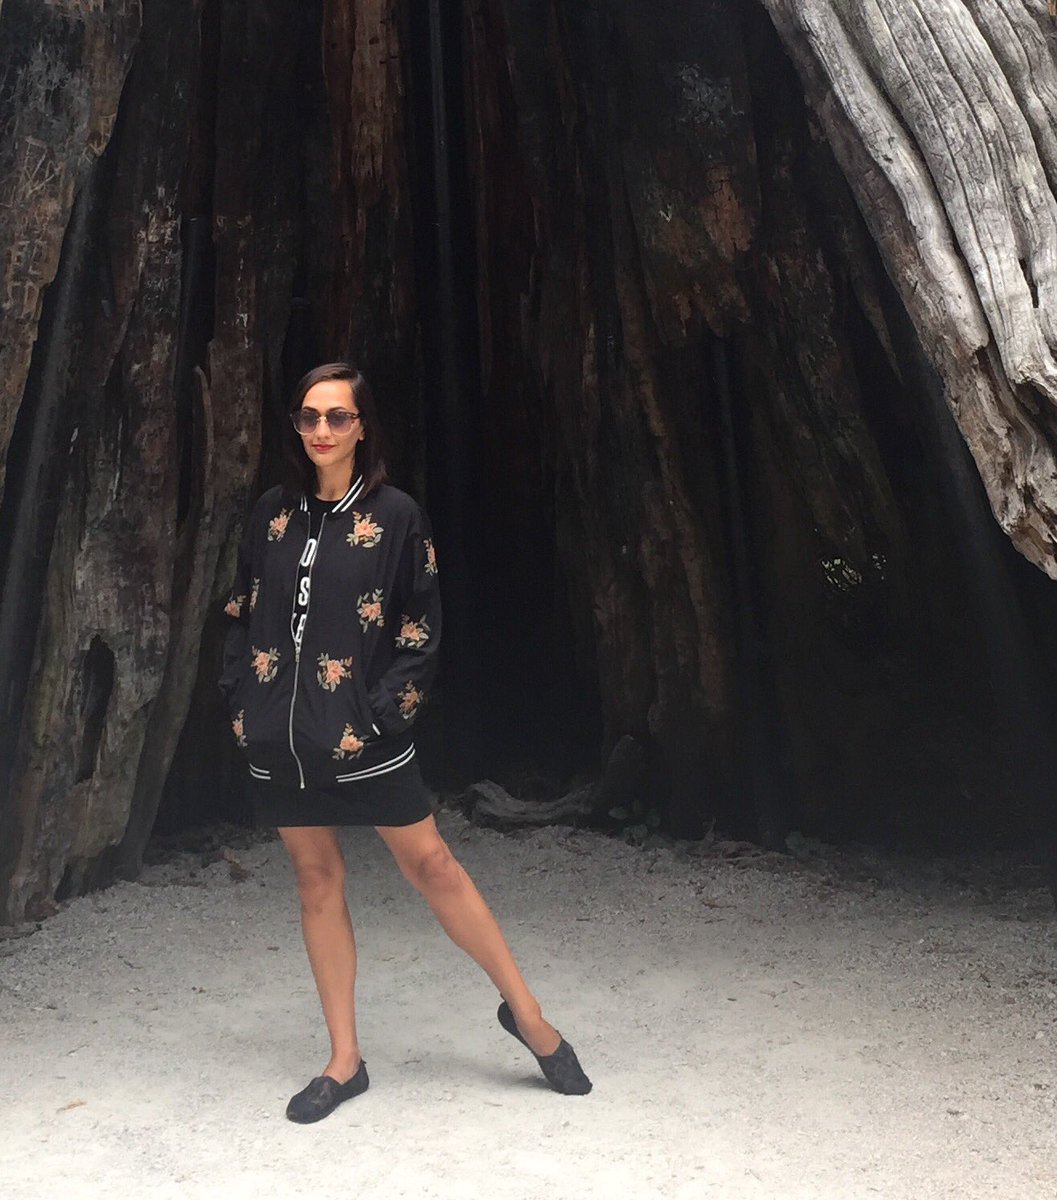 Standing COMPLETELY naturally inside an 800 year-old cedar in Stanley Park. #vancouver #dancerpose